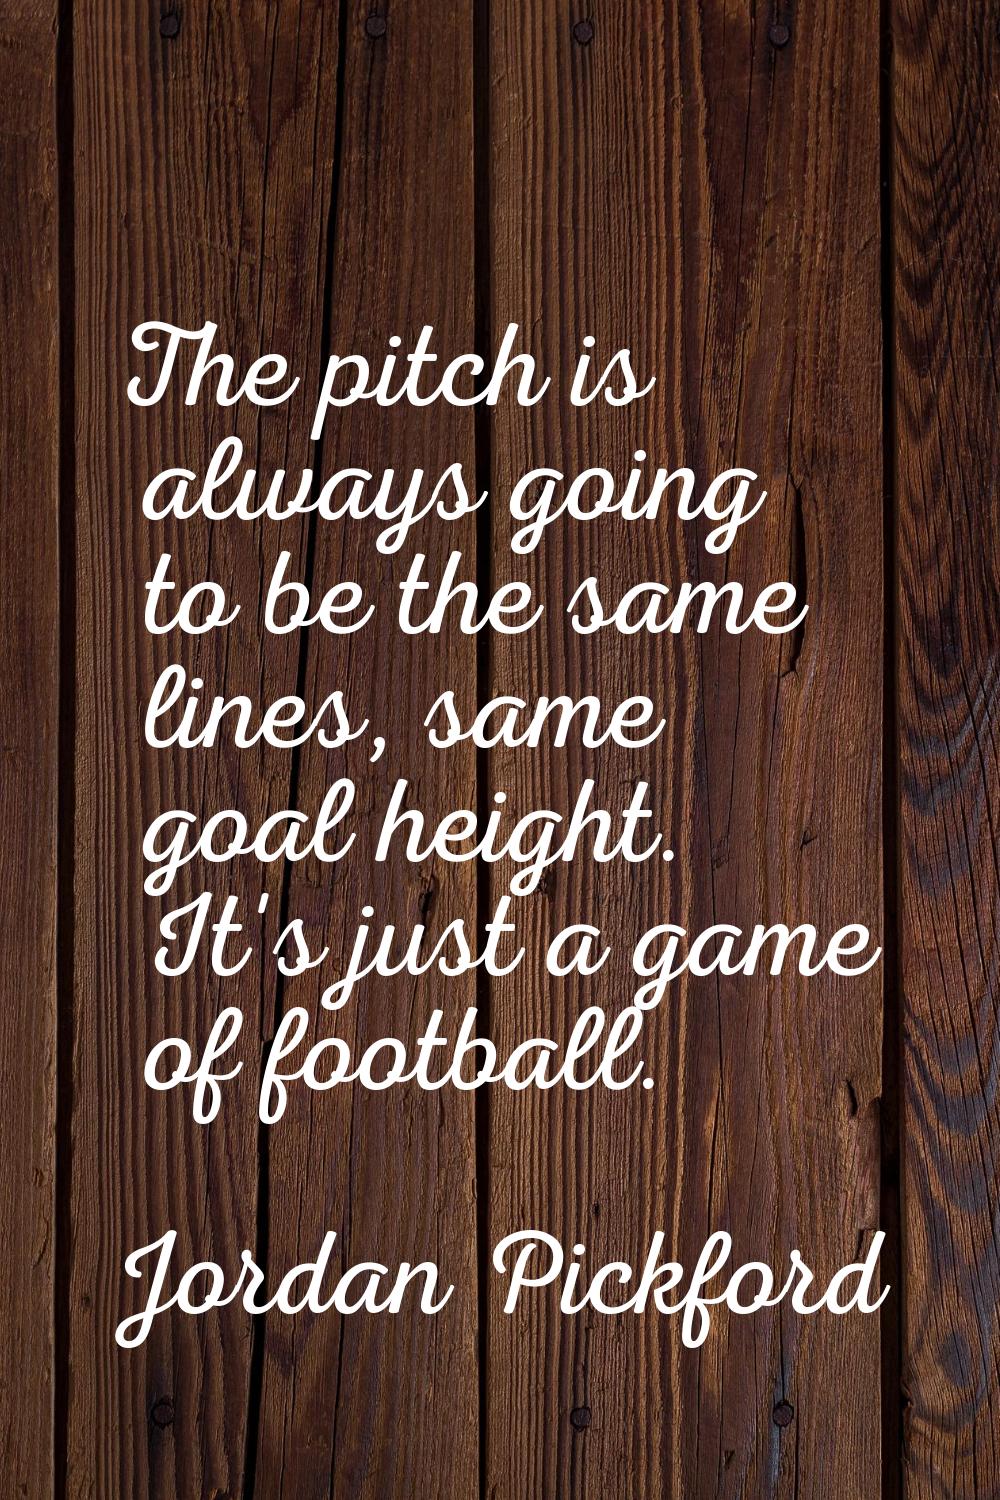 The pitch is always going to be the same lines, same goal height. It's just a game of football.